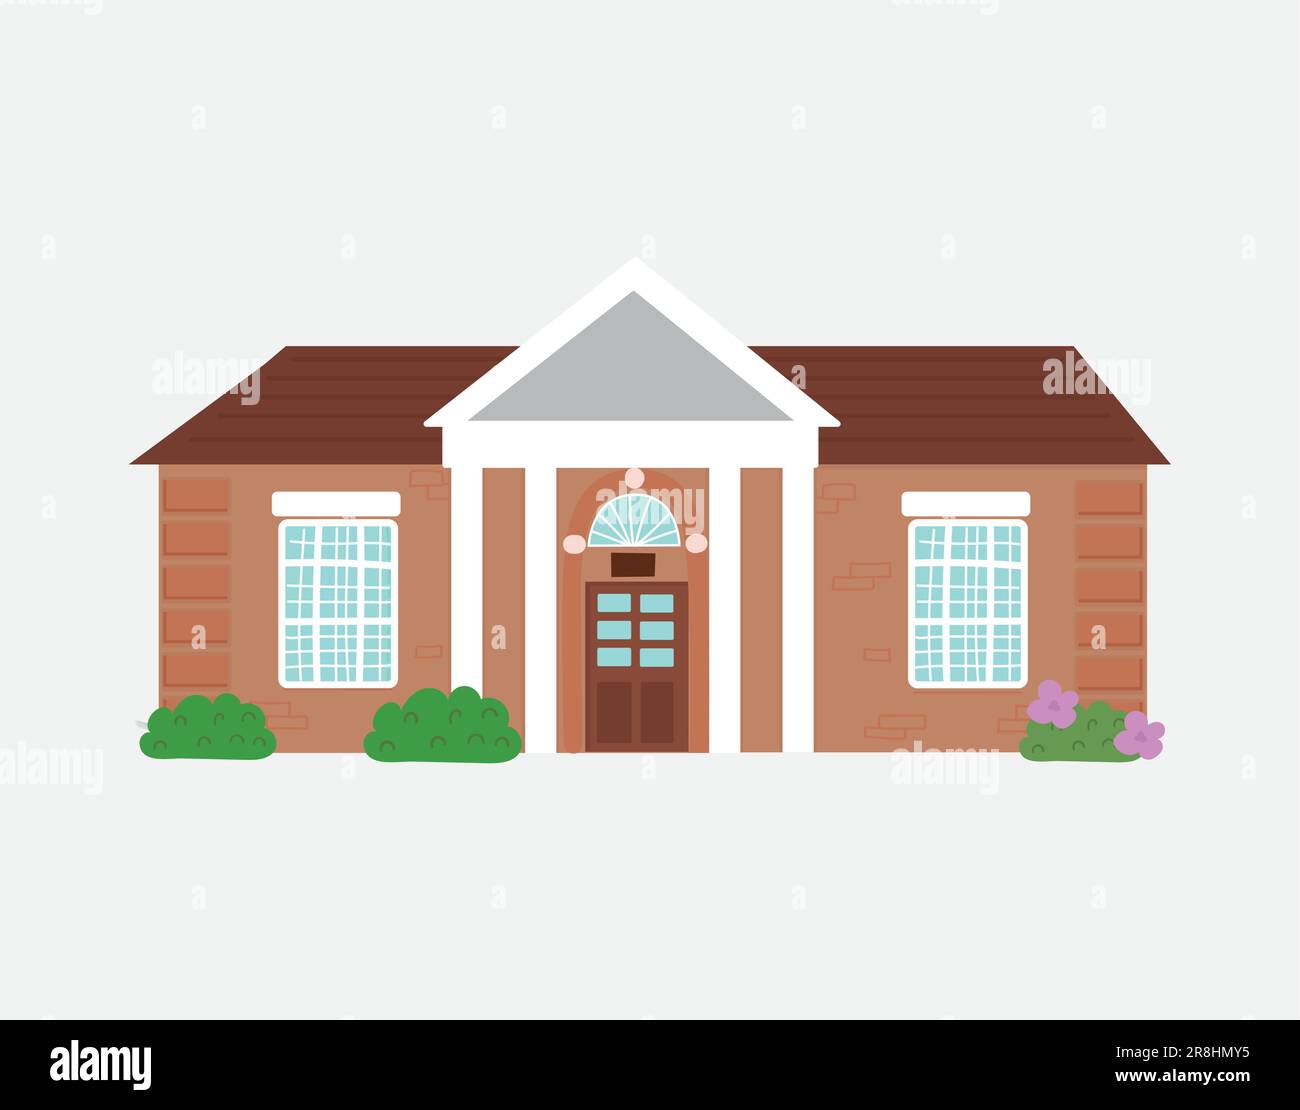 House exteriors icon. Residential town buildings architecture. Traditional home designs. Hand drawn real estate object with windows, doors and plants. Stock Vector